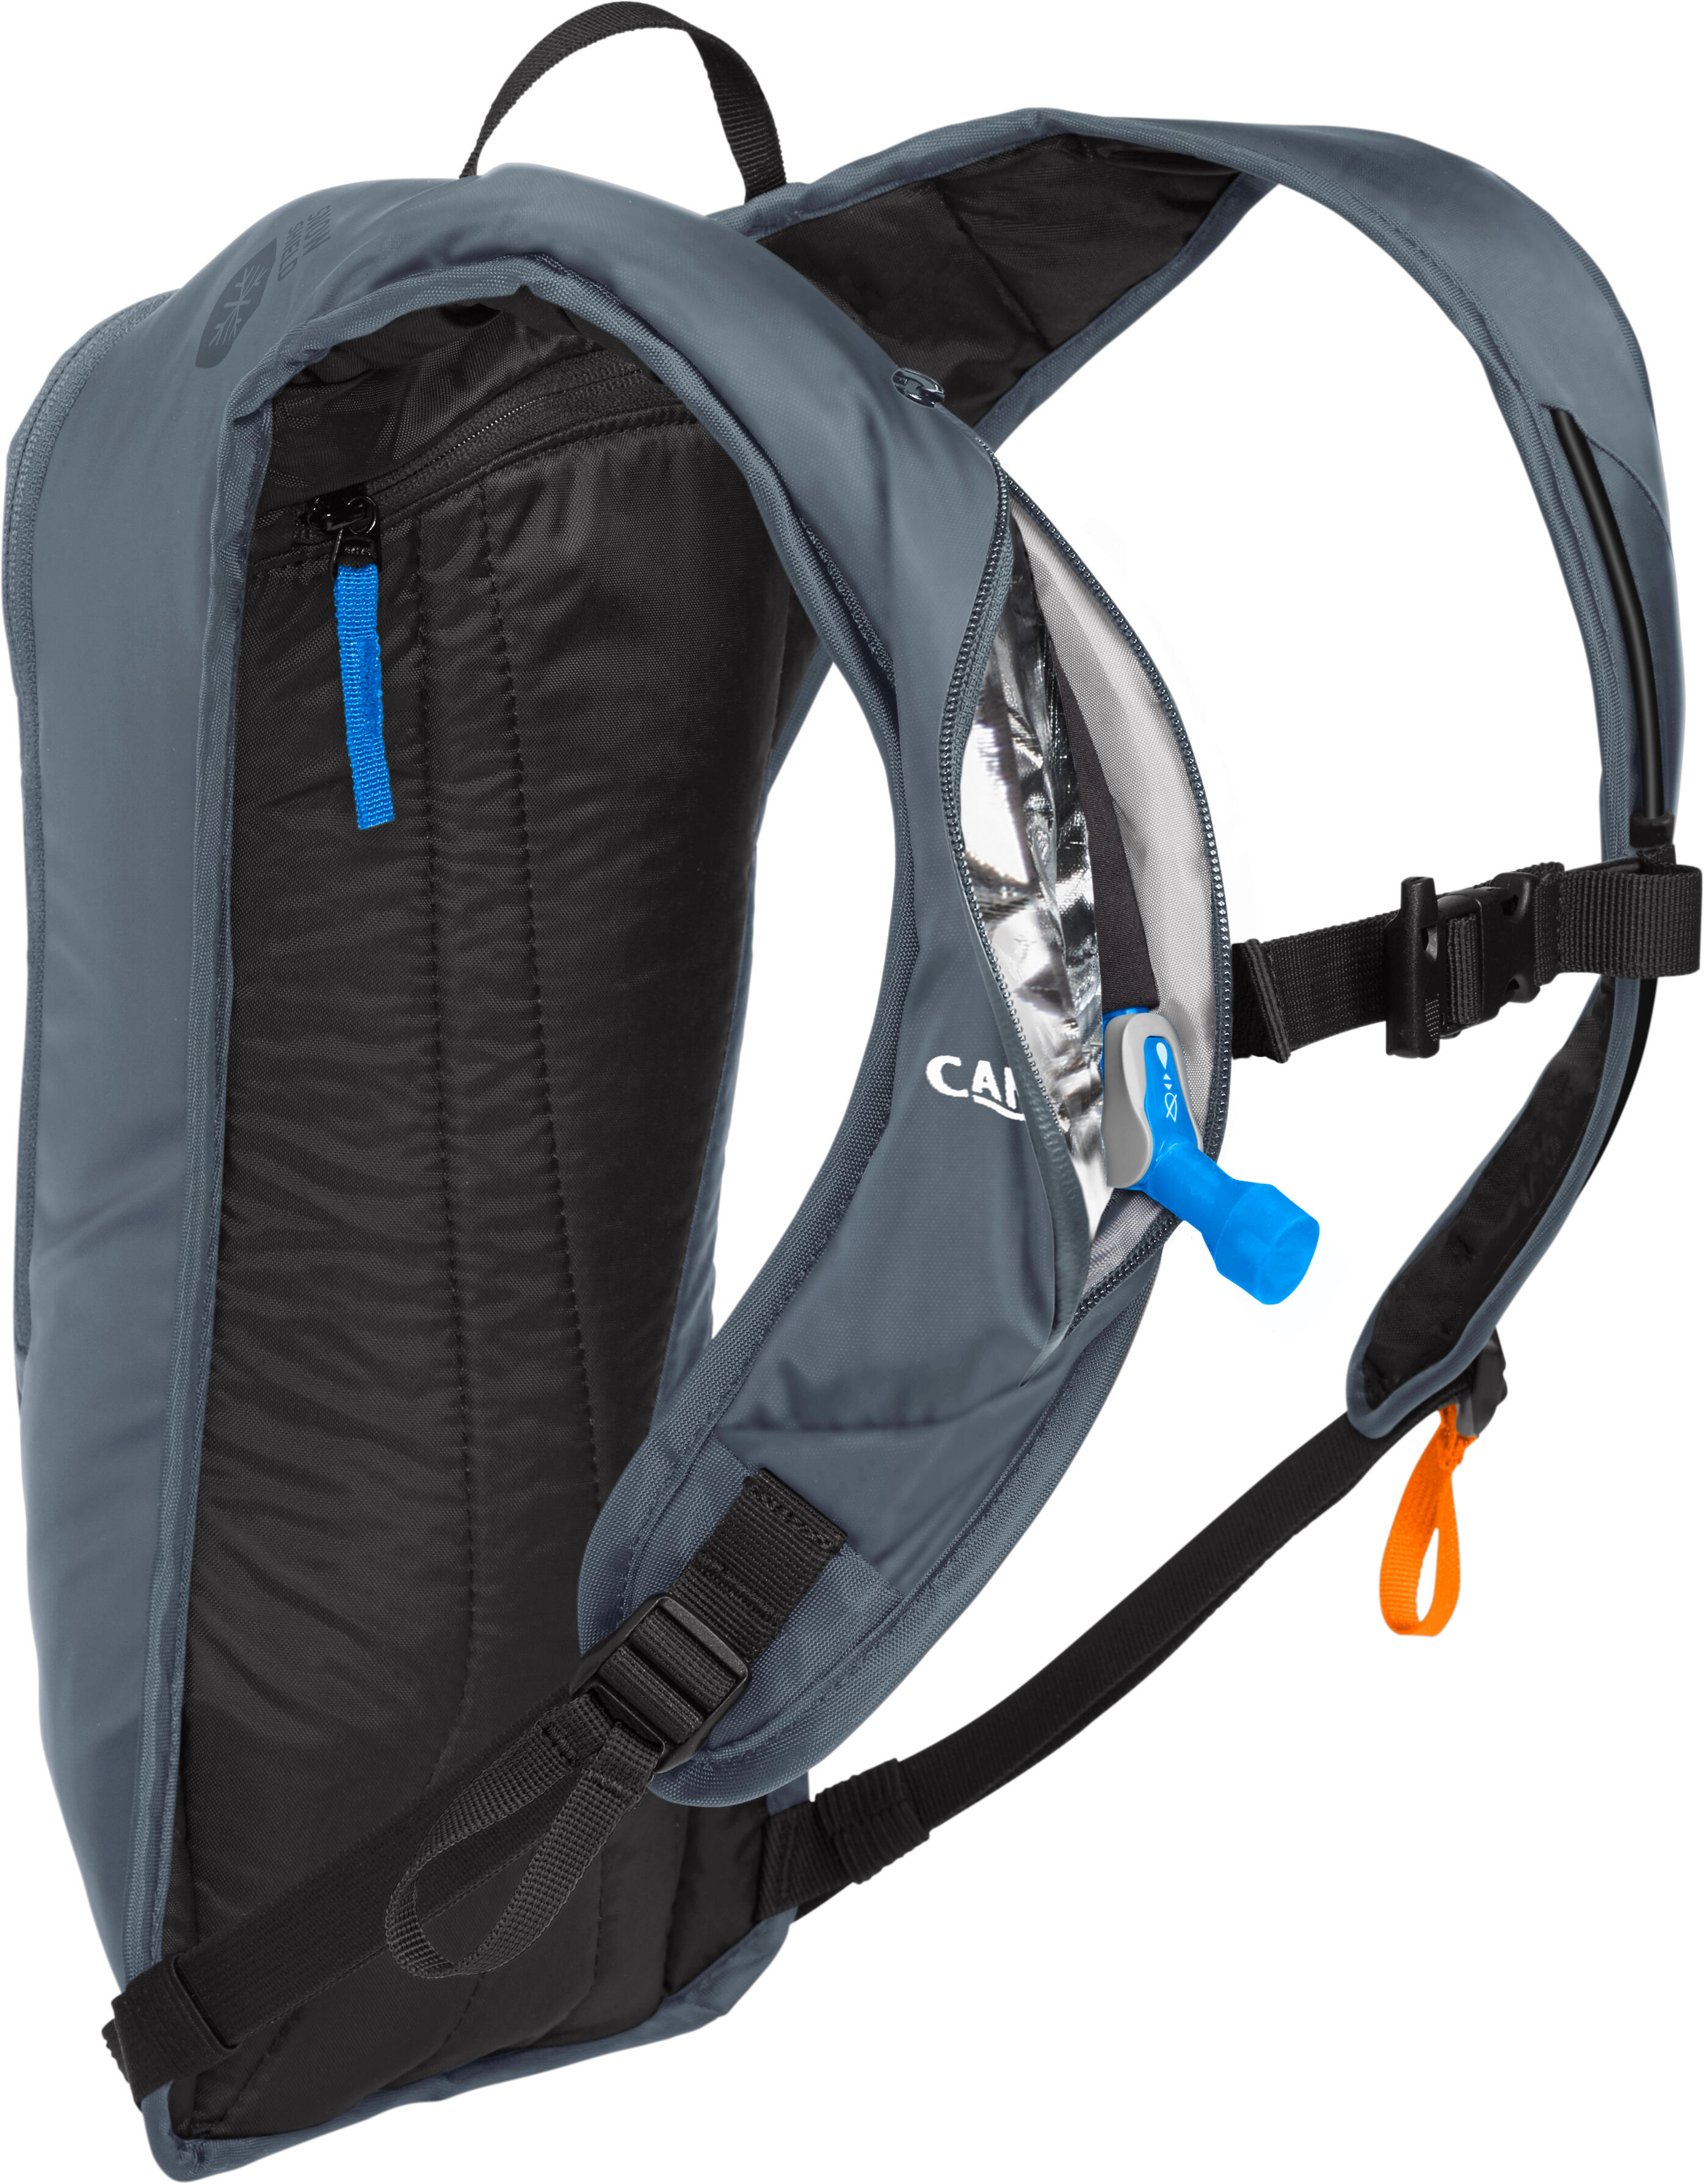 Zoid Winter Hydration Pack 7/7